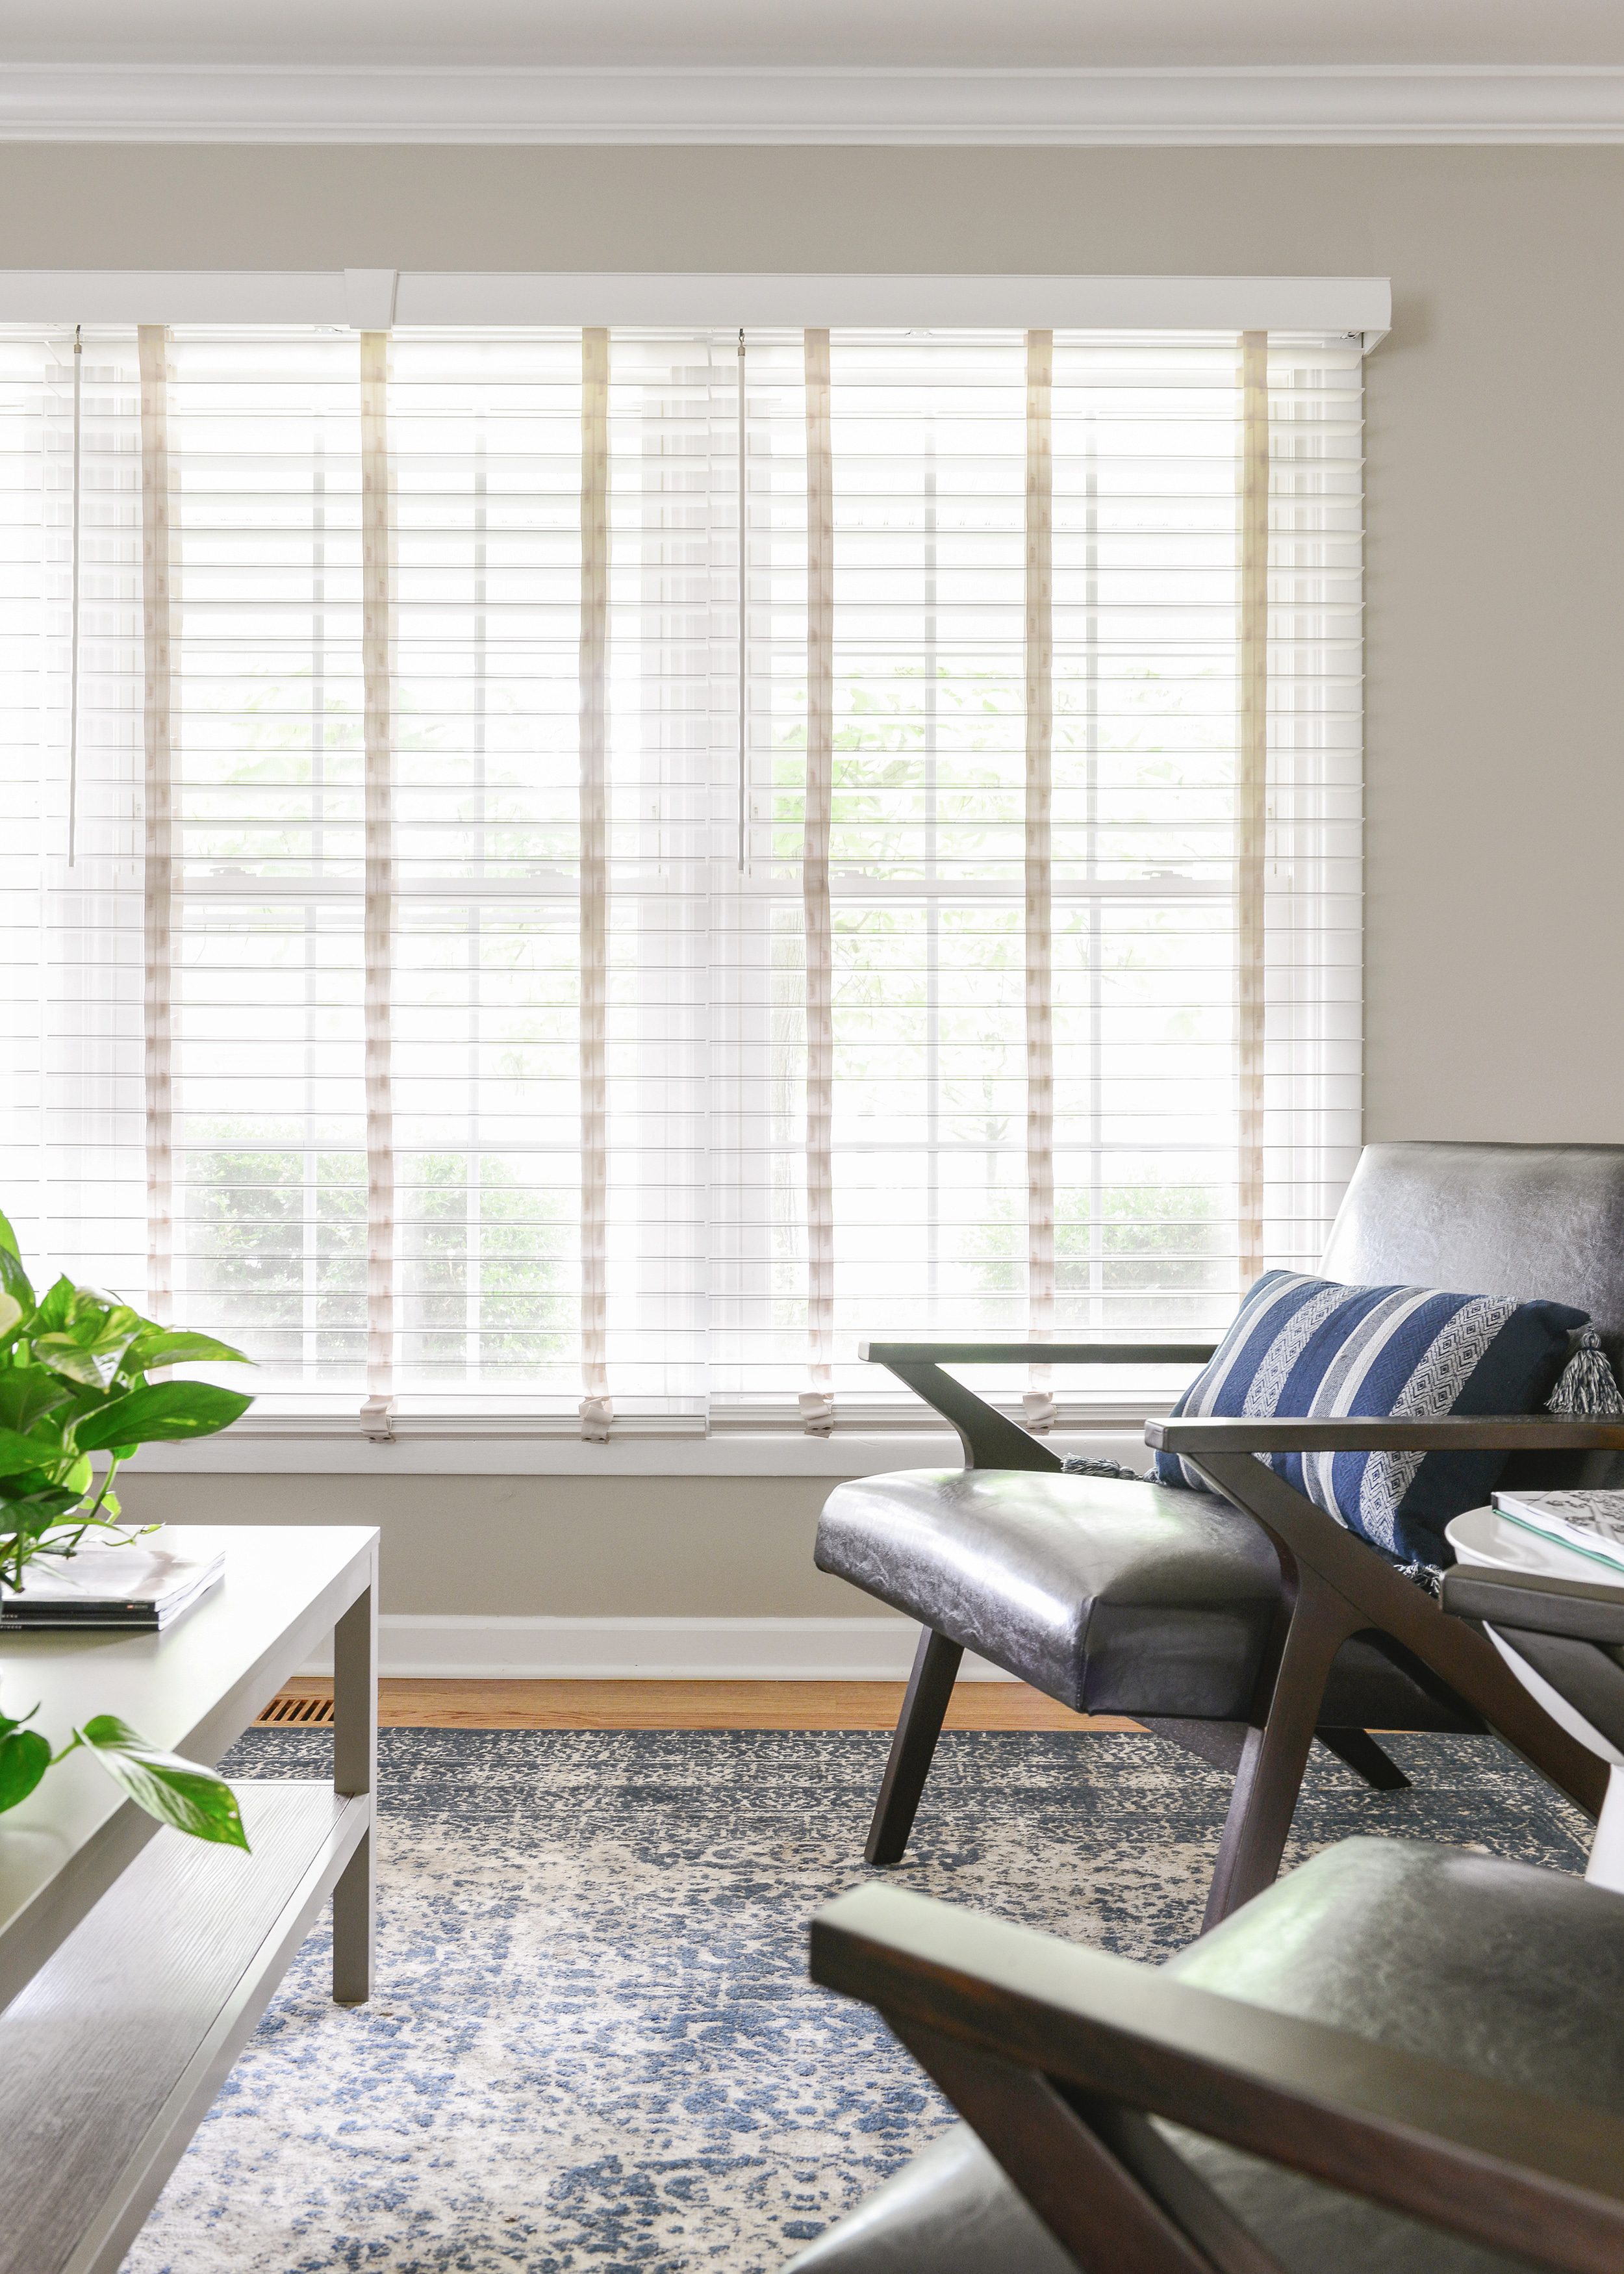 Horizontal blinds in a living room setting | via Yellow Brick Home: Which type of window treatment should you use? 